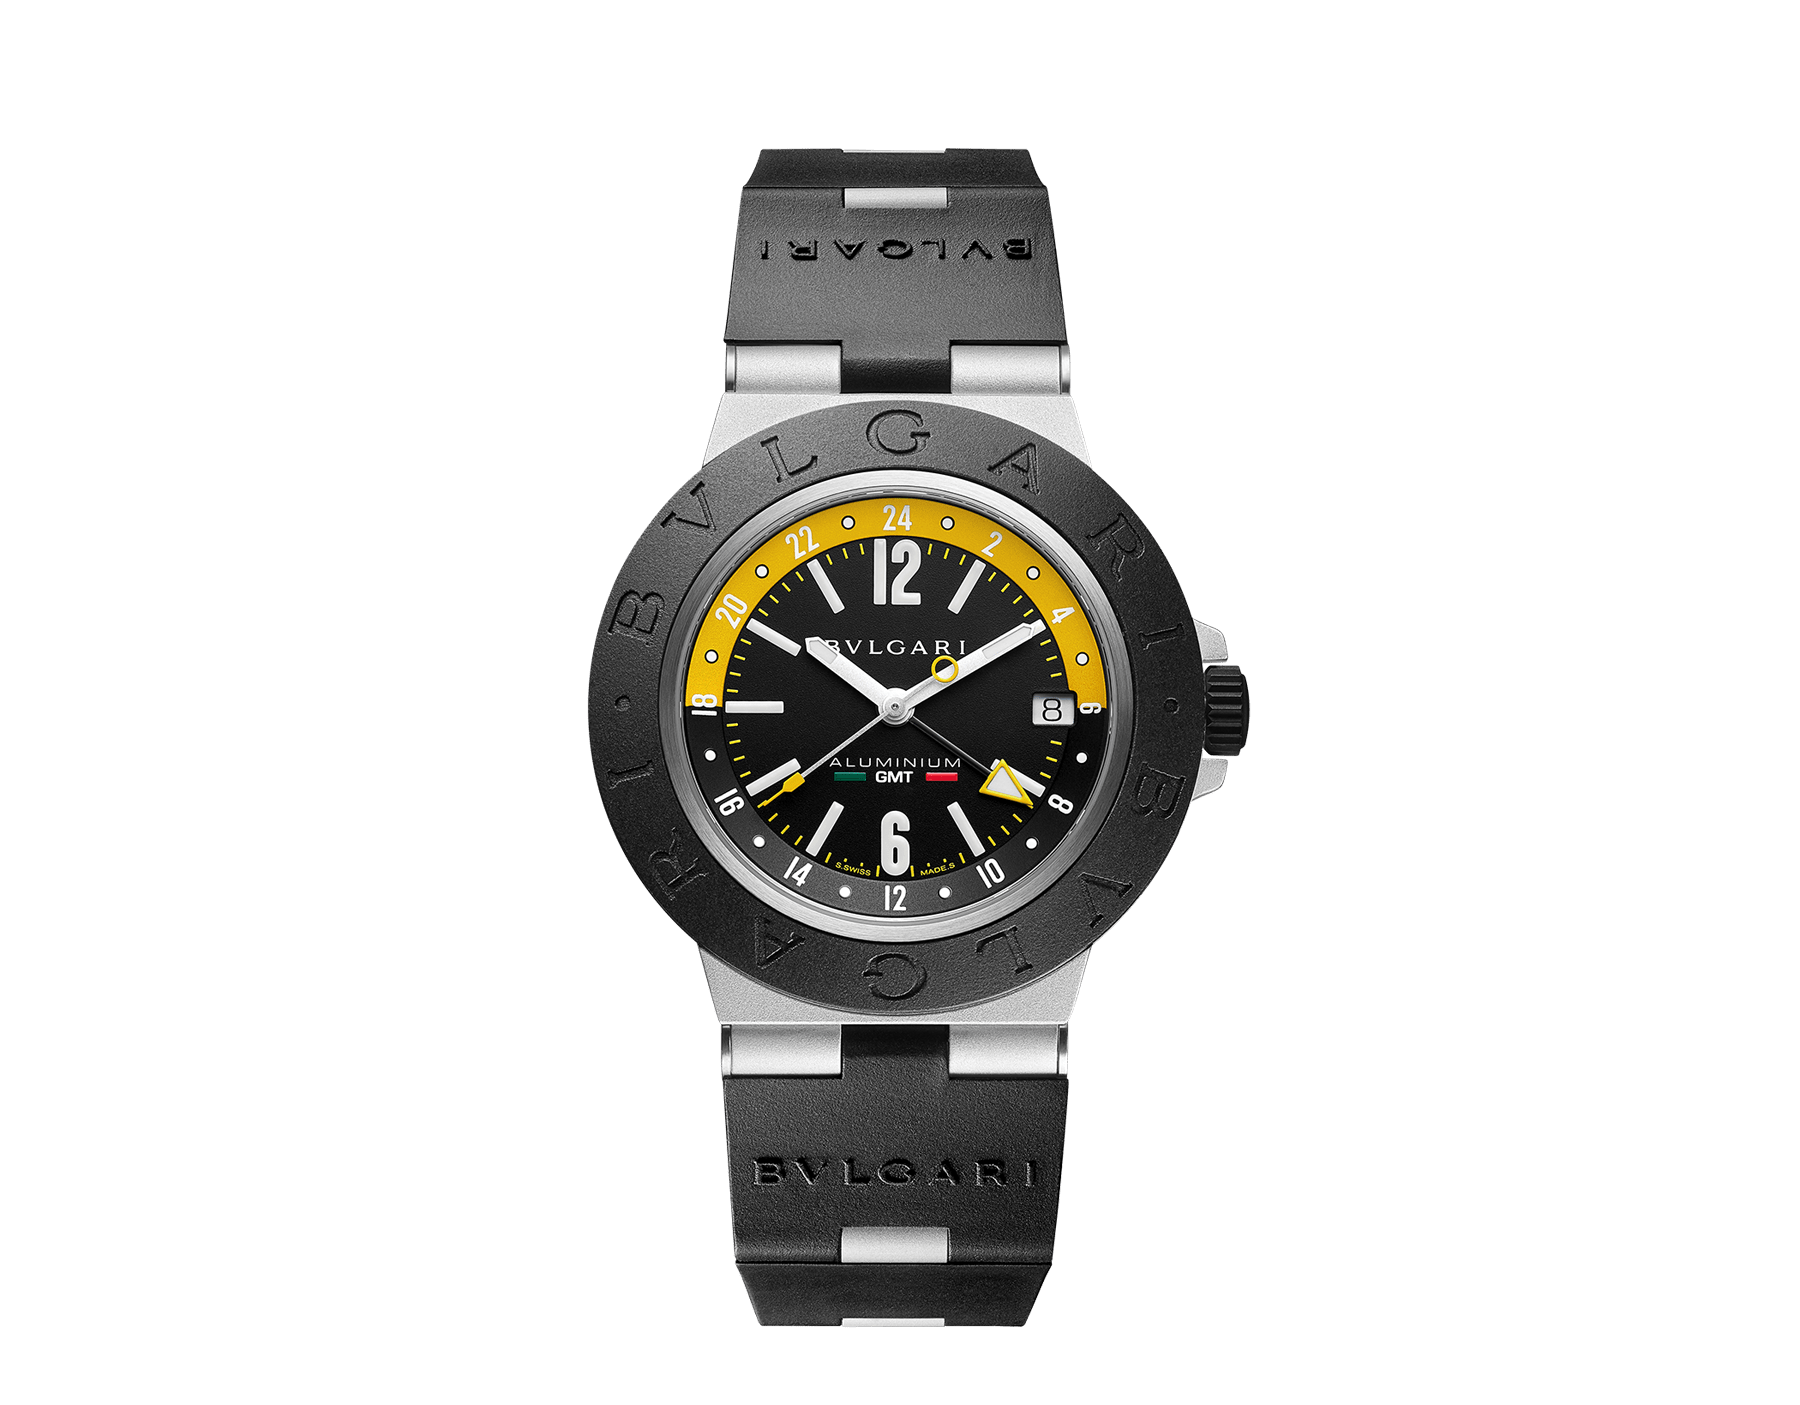 Bulgari Aluminium Amerigo Vespucci Special Edition watch with mechanical manufacture movement, automatic winding, HMSD and GMT, 40 mm aluminium case, black rubber bezel with BVLGARI BVLGARI engraving, yellow and black inner dial with GMT indications and black rubber bracelet. Water-resistant up to 100 metres. Special Edition limited to 1,000 pieces. 103702 image 1